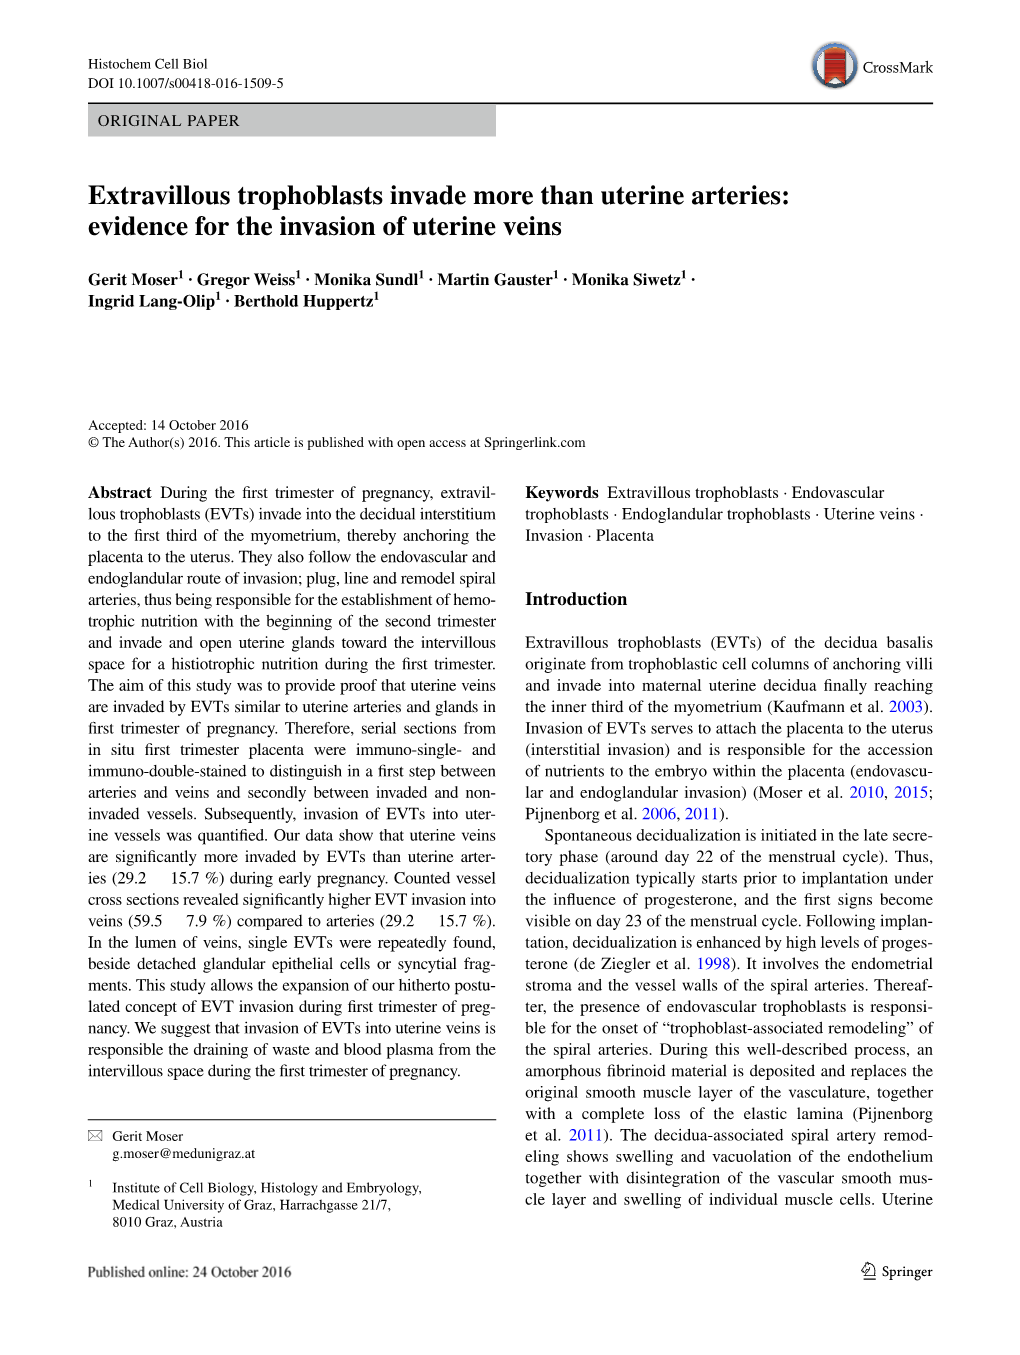 Extravillous Trophoblasts Invade More Than Uterine Arteries: Evidence for the Invasion of Uterine Veins